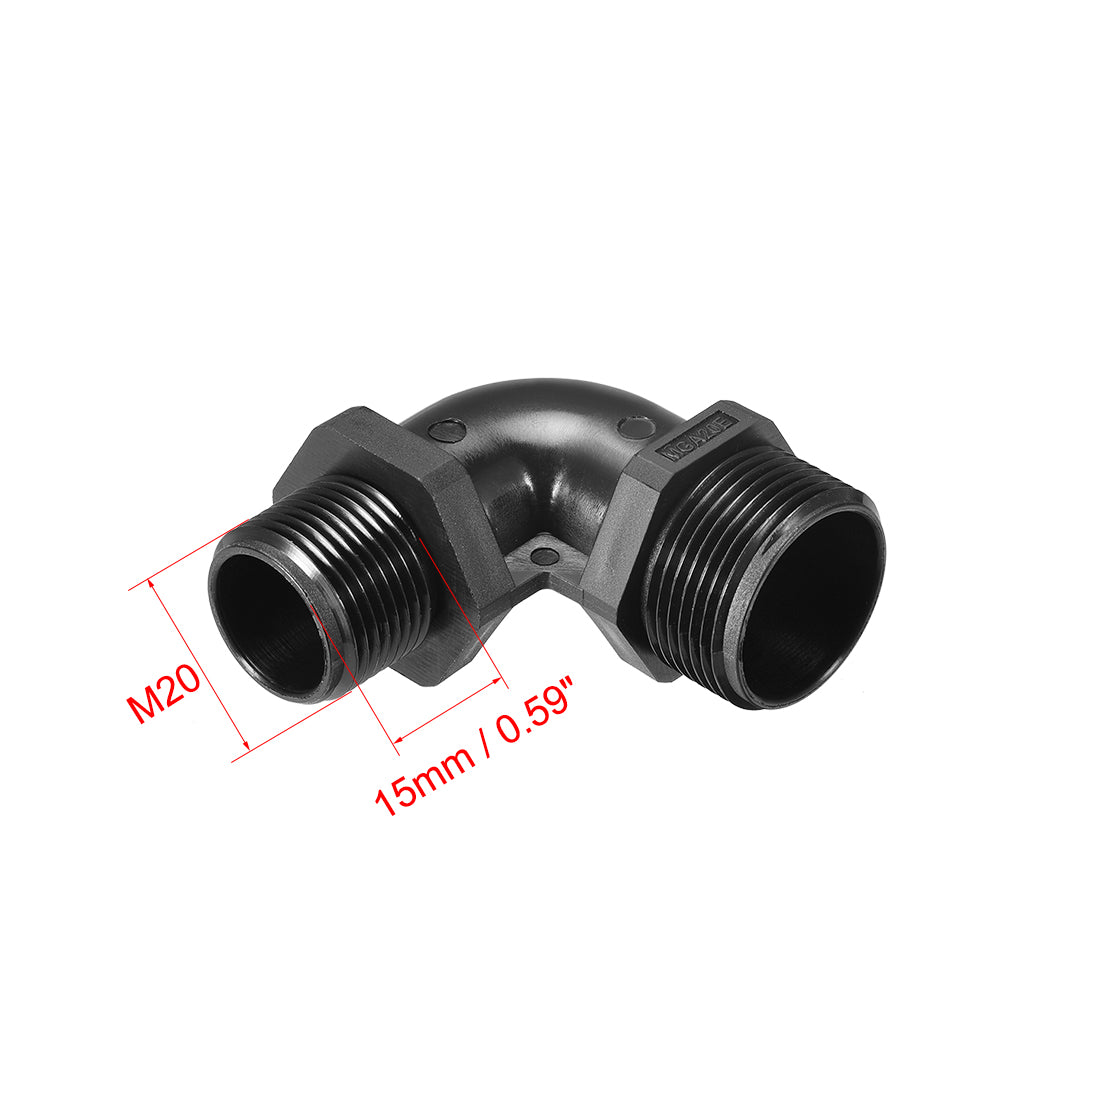 Uxcell Uxcell M20 Cable Gland 90 Degree Waterproof IP68 Nylon Joint Adjustable Locknut with Strain Relief for 9mm-14mm Dia Cable Wire